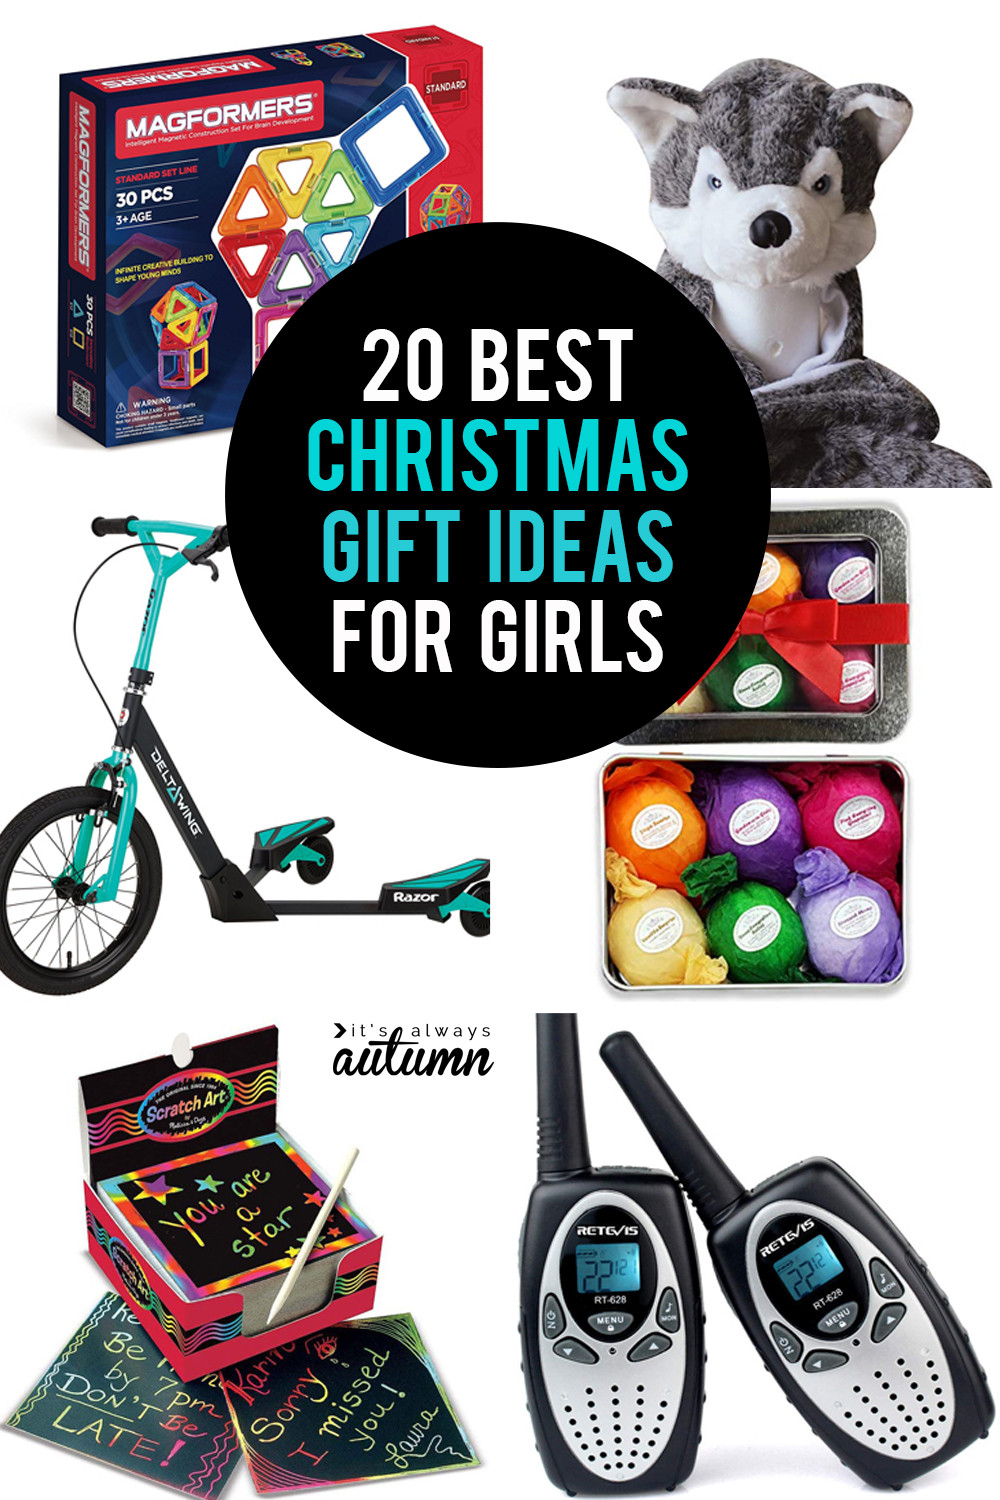 Top Gift Ideas For Girls
 The 20 best Christmas ts for girls It s Always Autumn